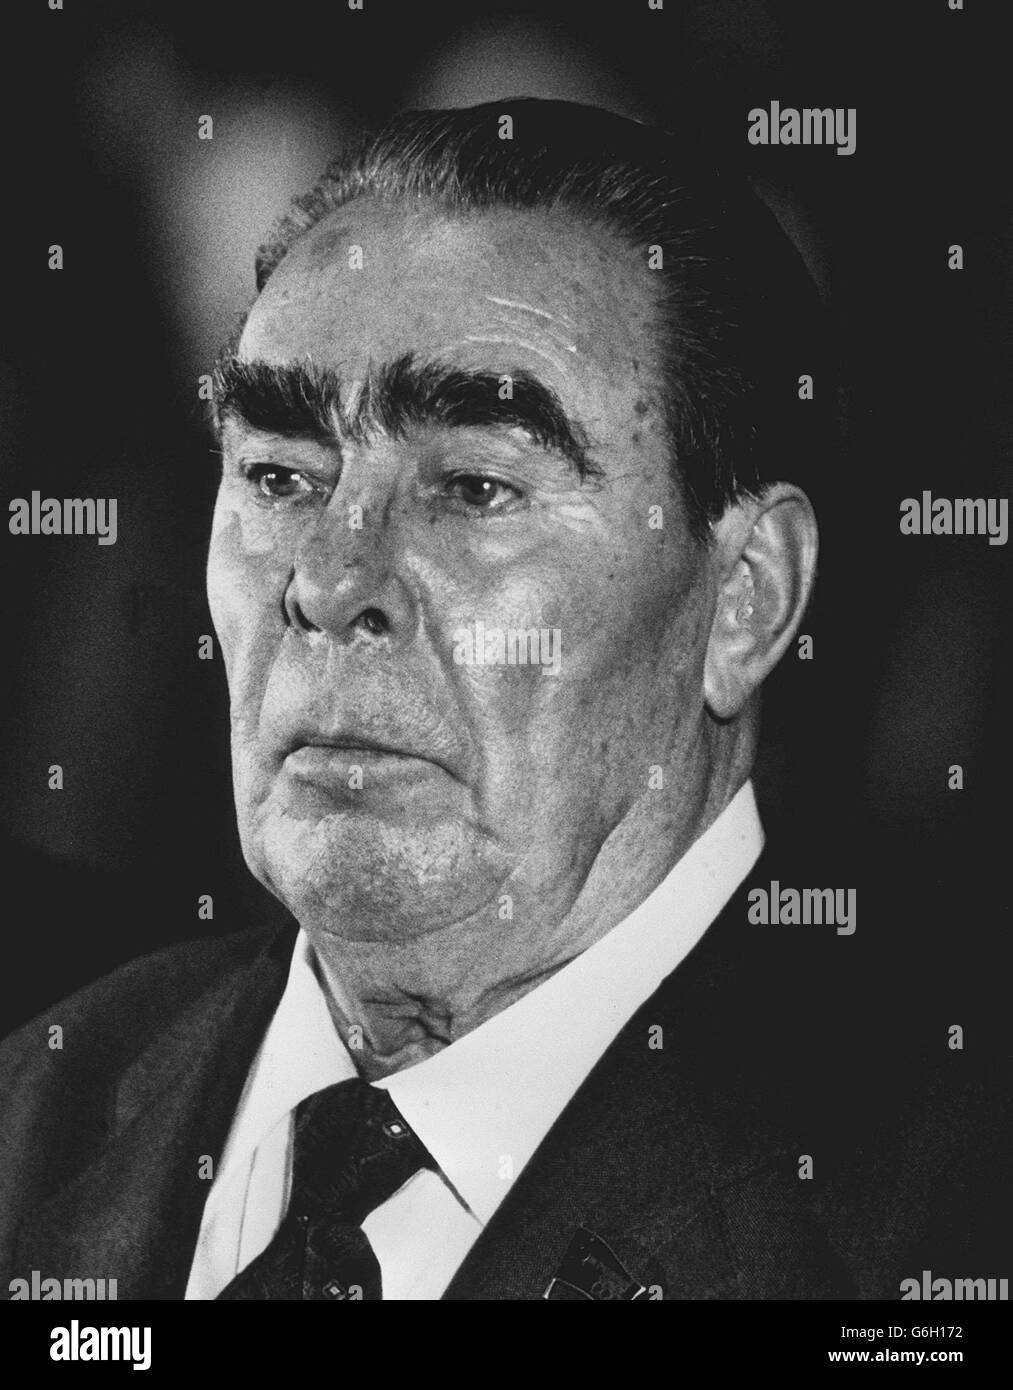 15TH OCTOBER: ON THIS DAY IN 1964, LEONID BREZHNEV DEPOSED NIKITA KRUSCHCHEV TO BECOME LEADER OF SOVIET RUSSIA. KRUSCHEV WAS ON HOLIDAY WHEN HE HEARD Ukraine born Soviet leader Leonid Brezhnev, who has been General Secretary of the Soviet Communist Party since 1966. 11/11/1982: Brezhnev dies. Stock Photo